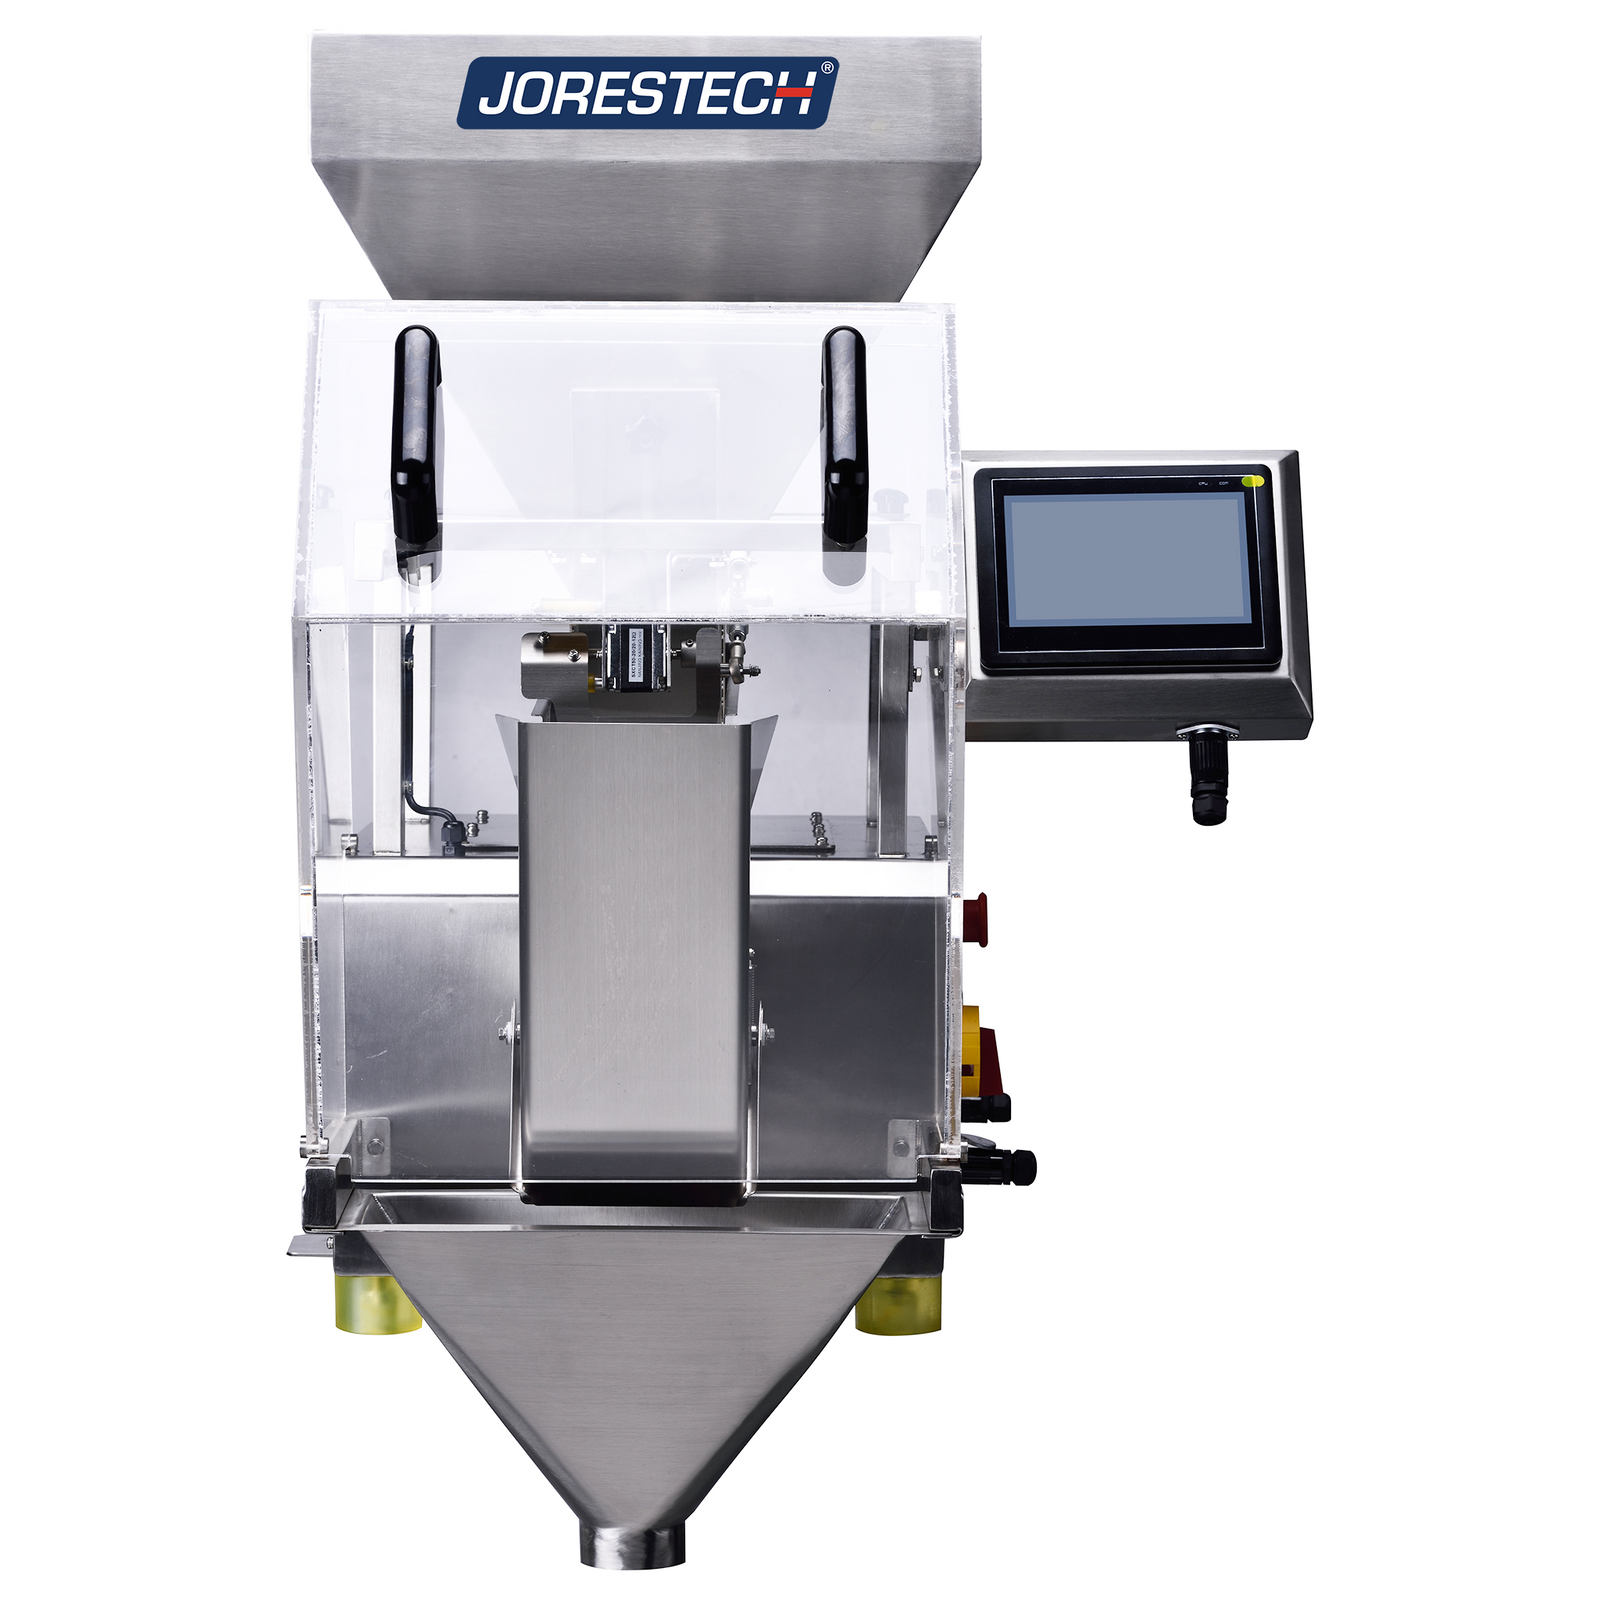 Frontal view of a stainless steel linear weighing machine with a JORESTECH sticker 